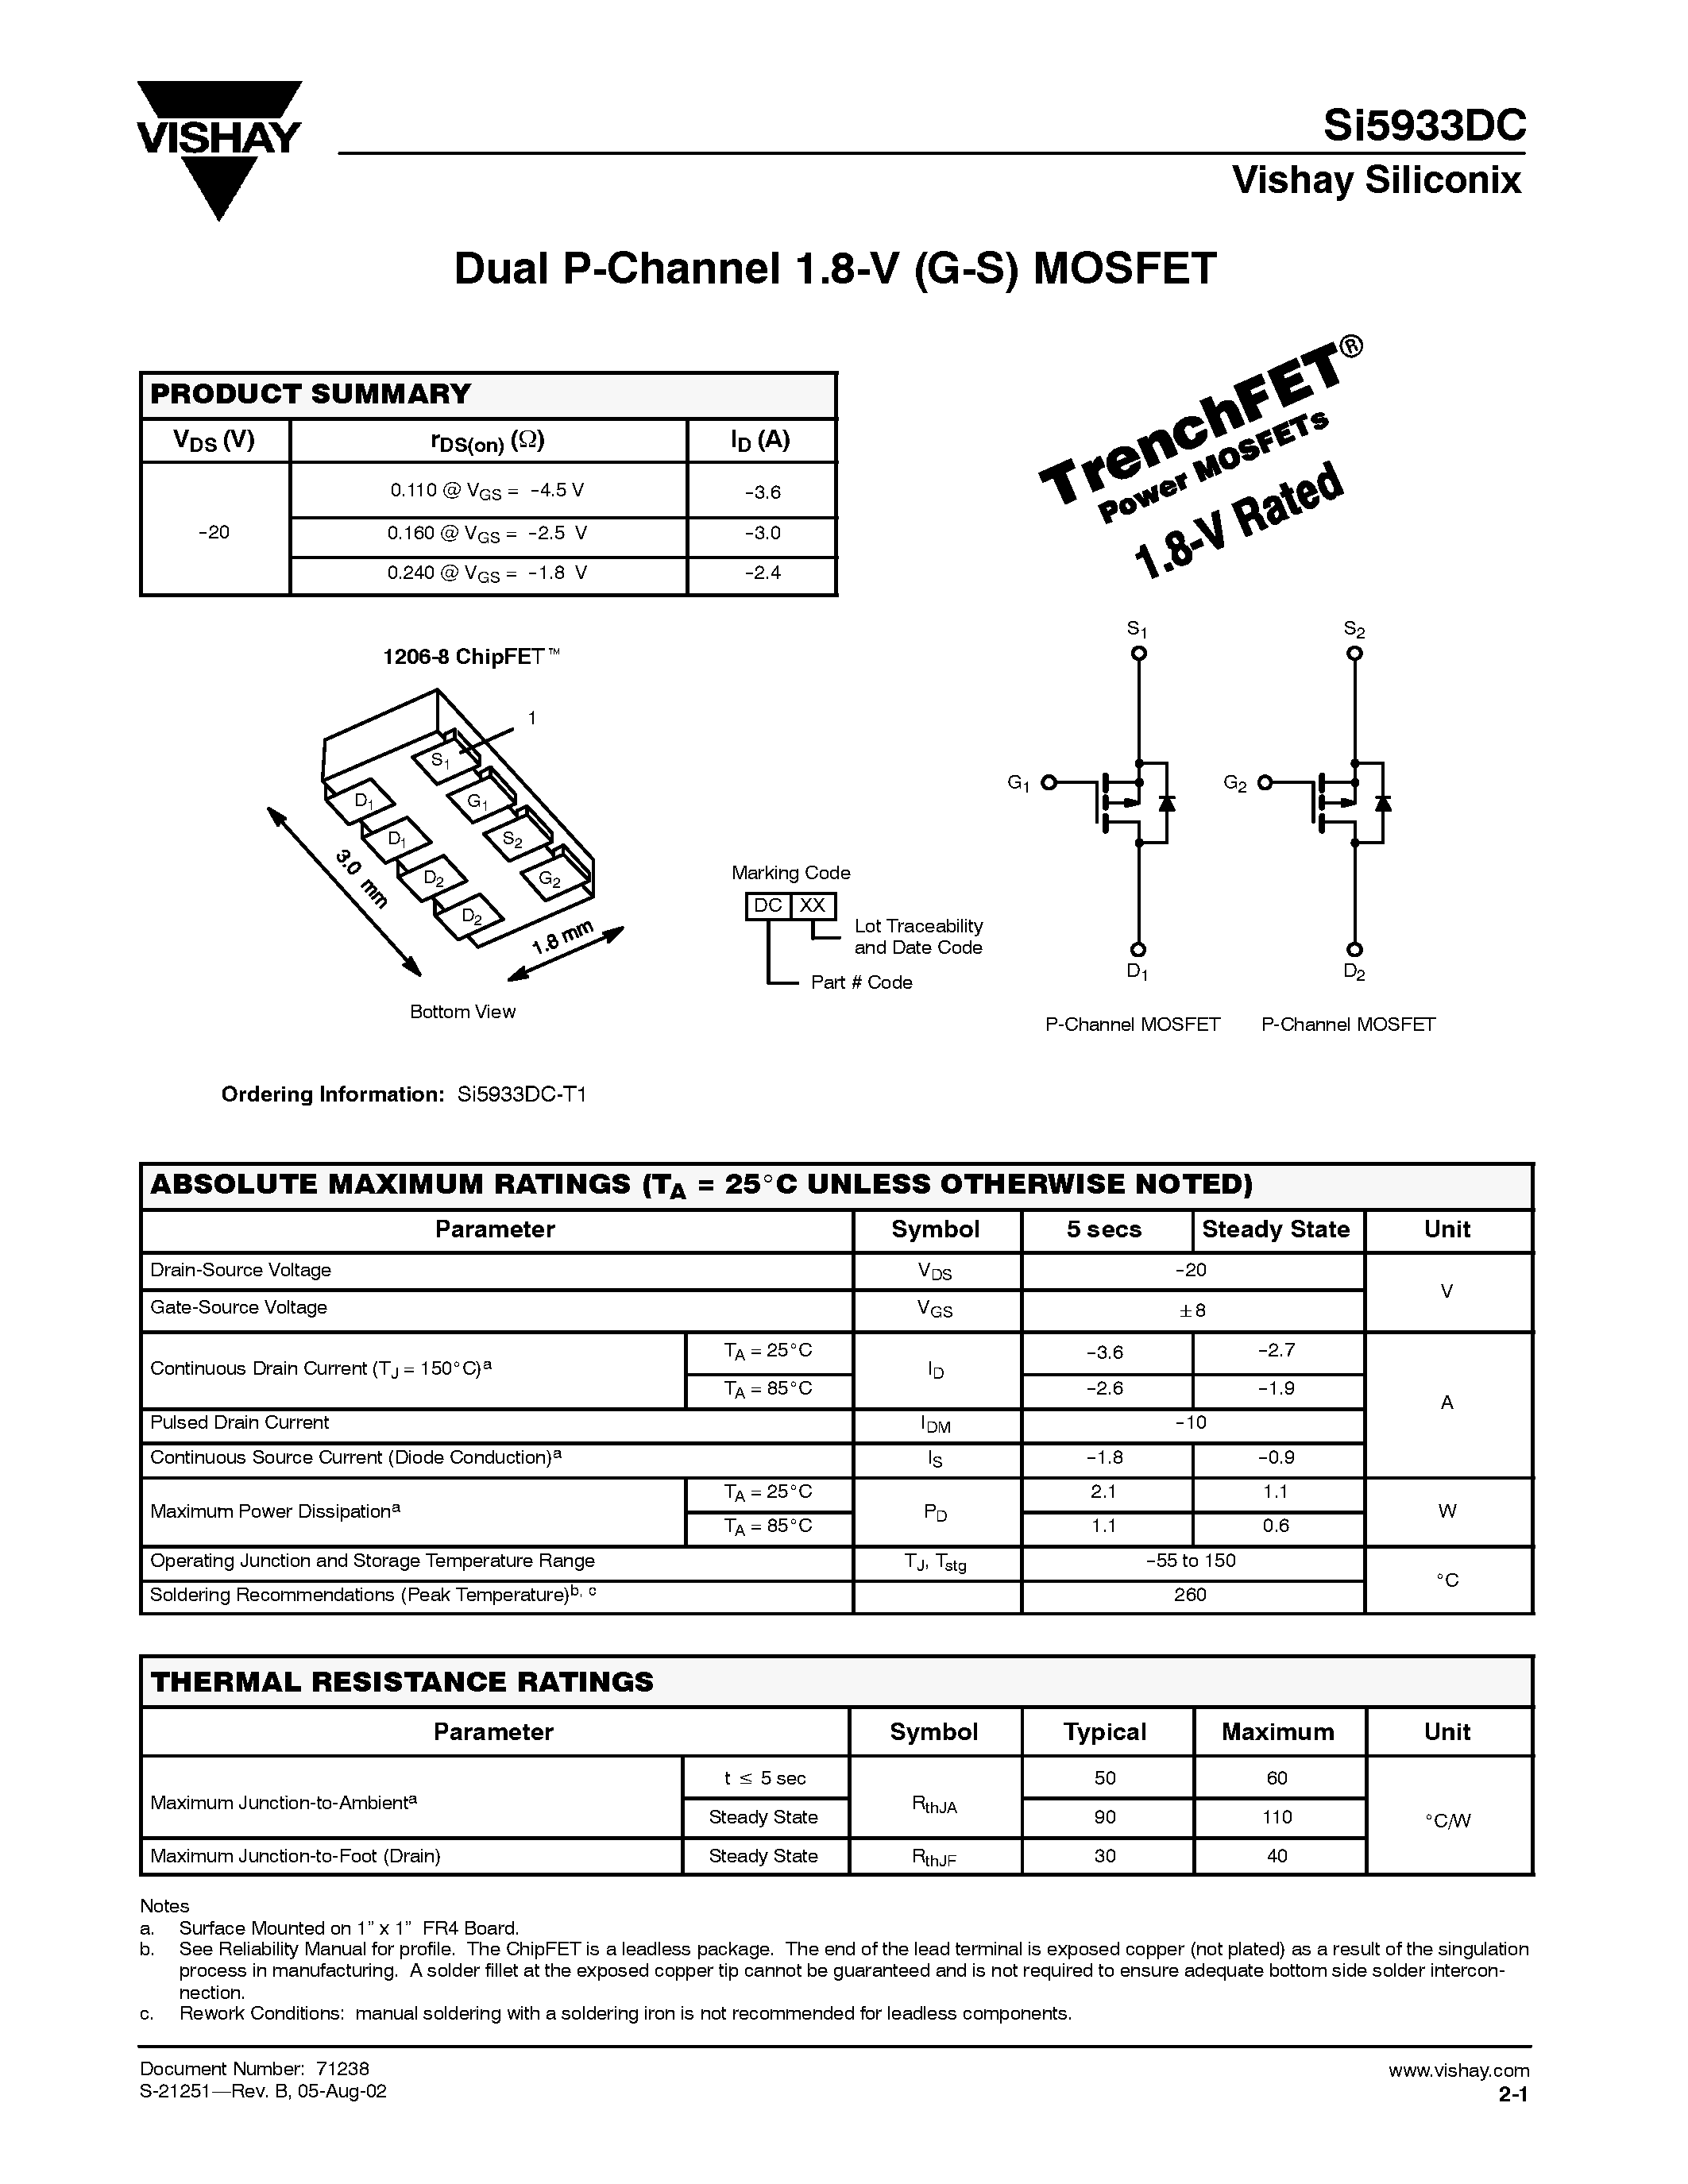 Даташит SI5933DC - Dual P-Channel 1.8-V (G-S) MOSFET страница 1